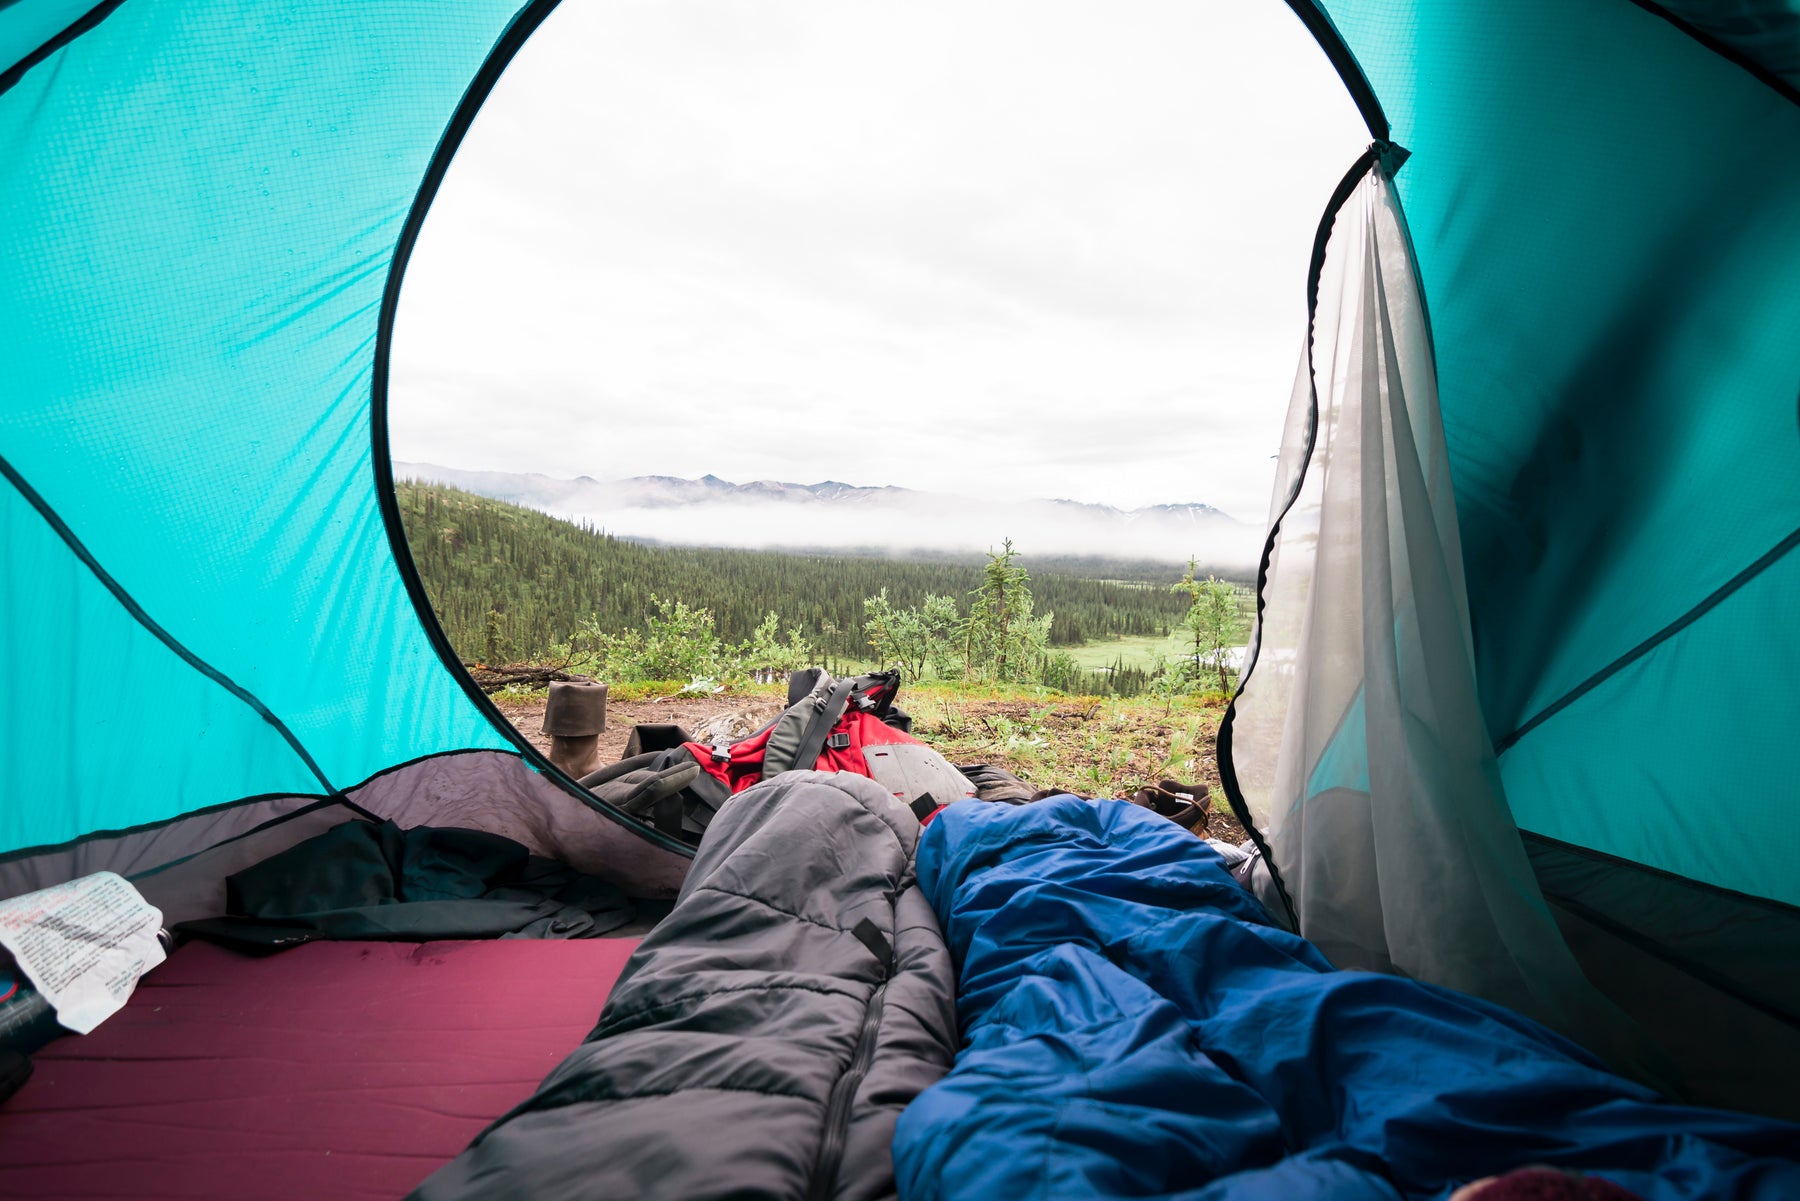 Buy wholesale camping equipment for affordable outdoor adventure